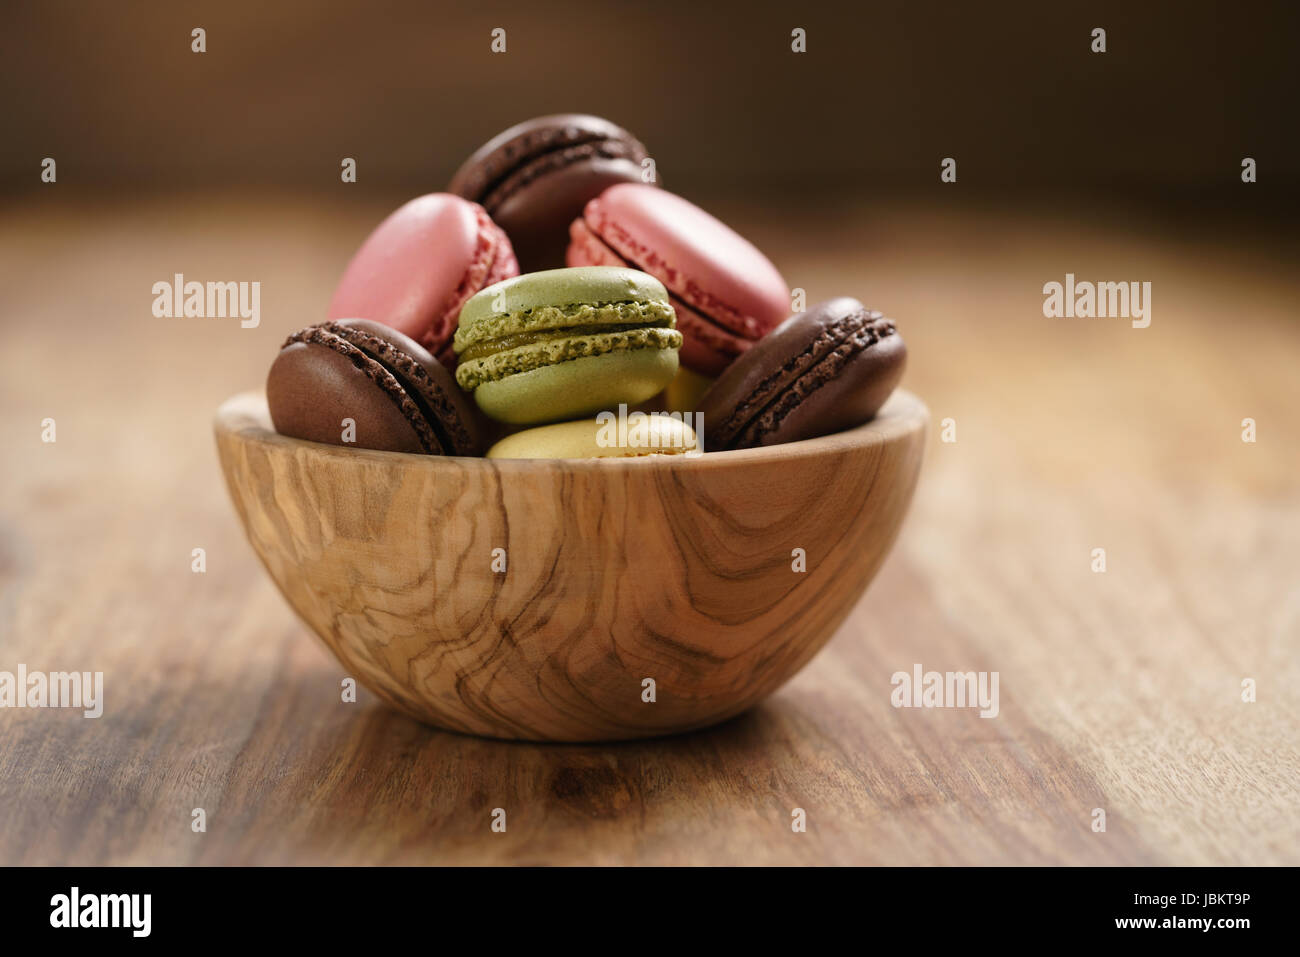 assorted macarons in wood bowl on wooden table Stock Photo